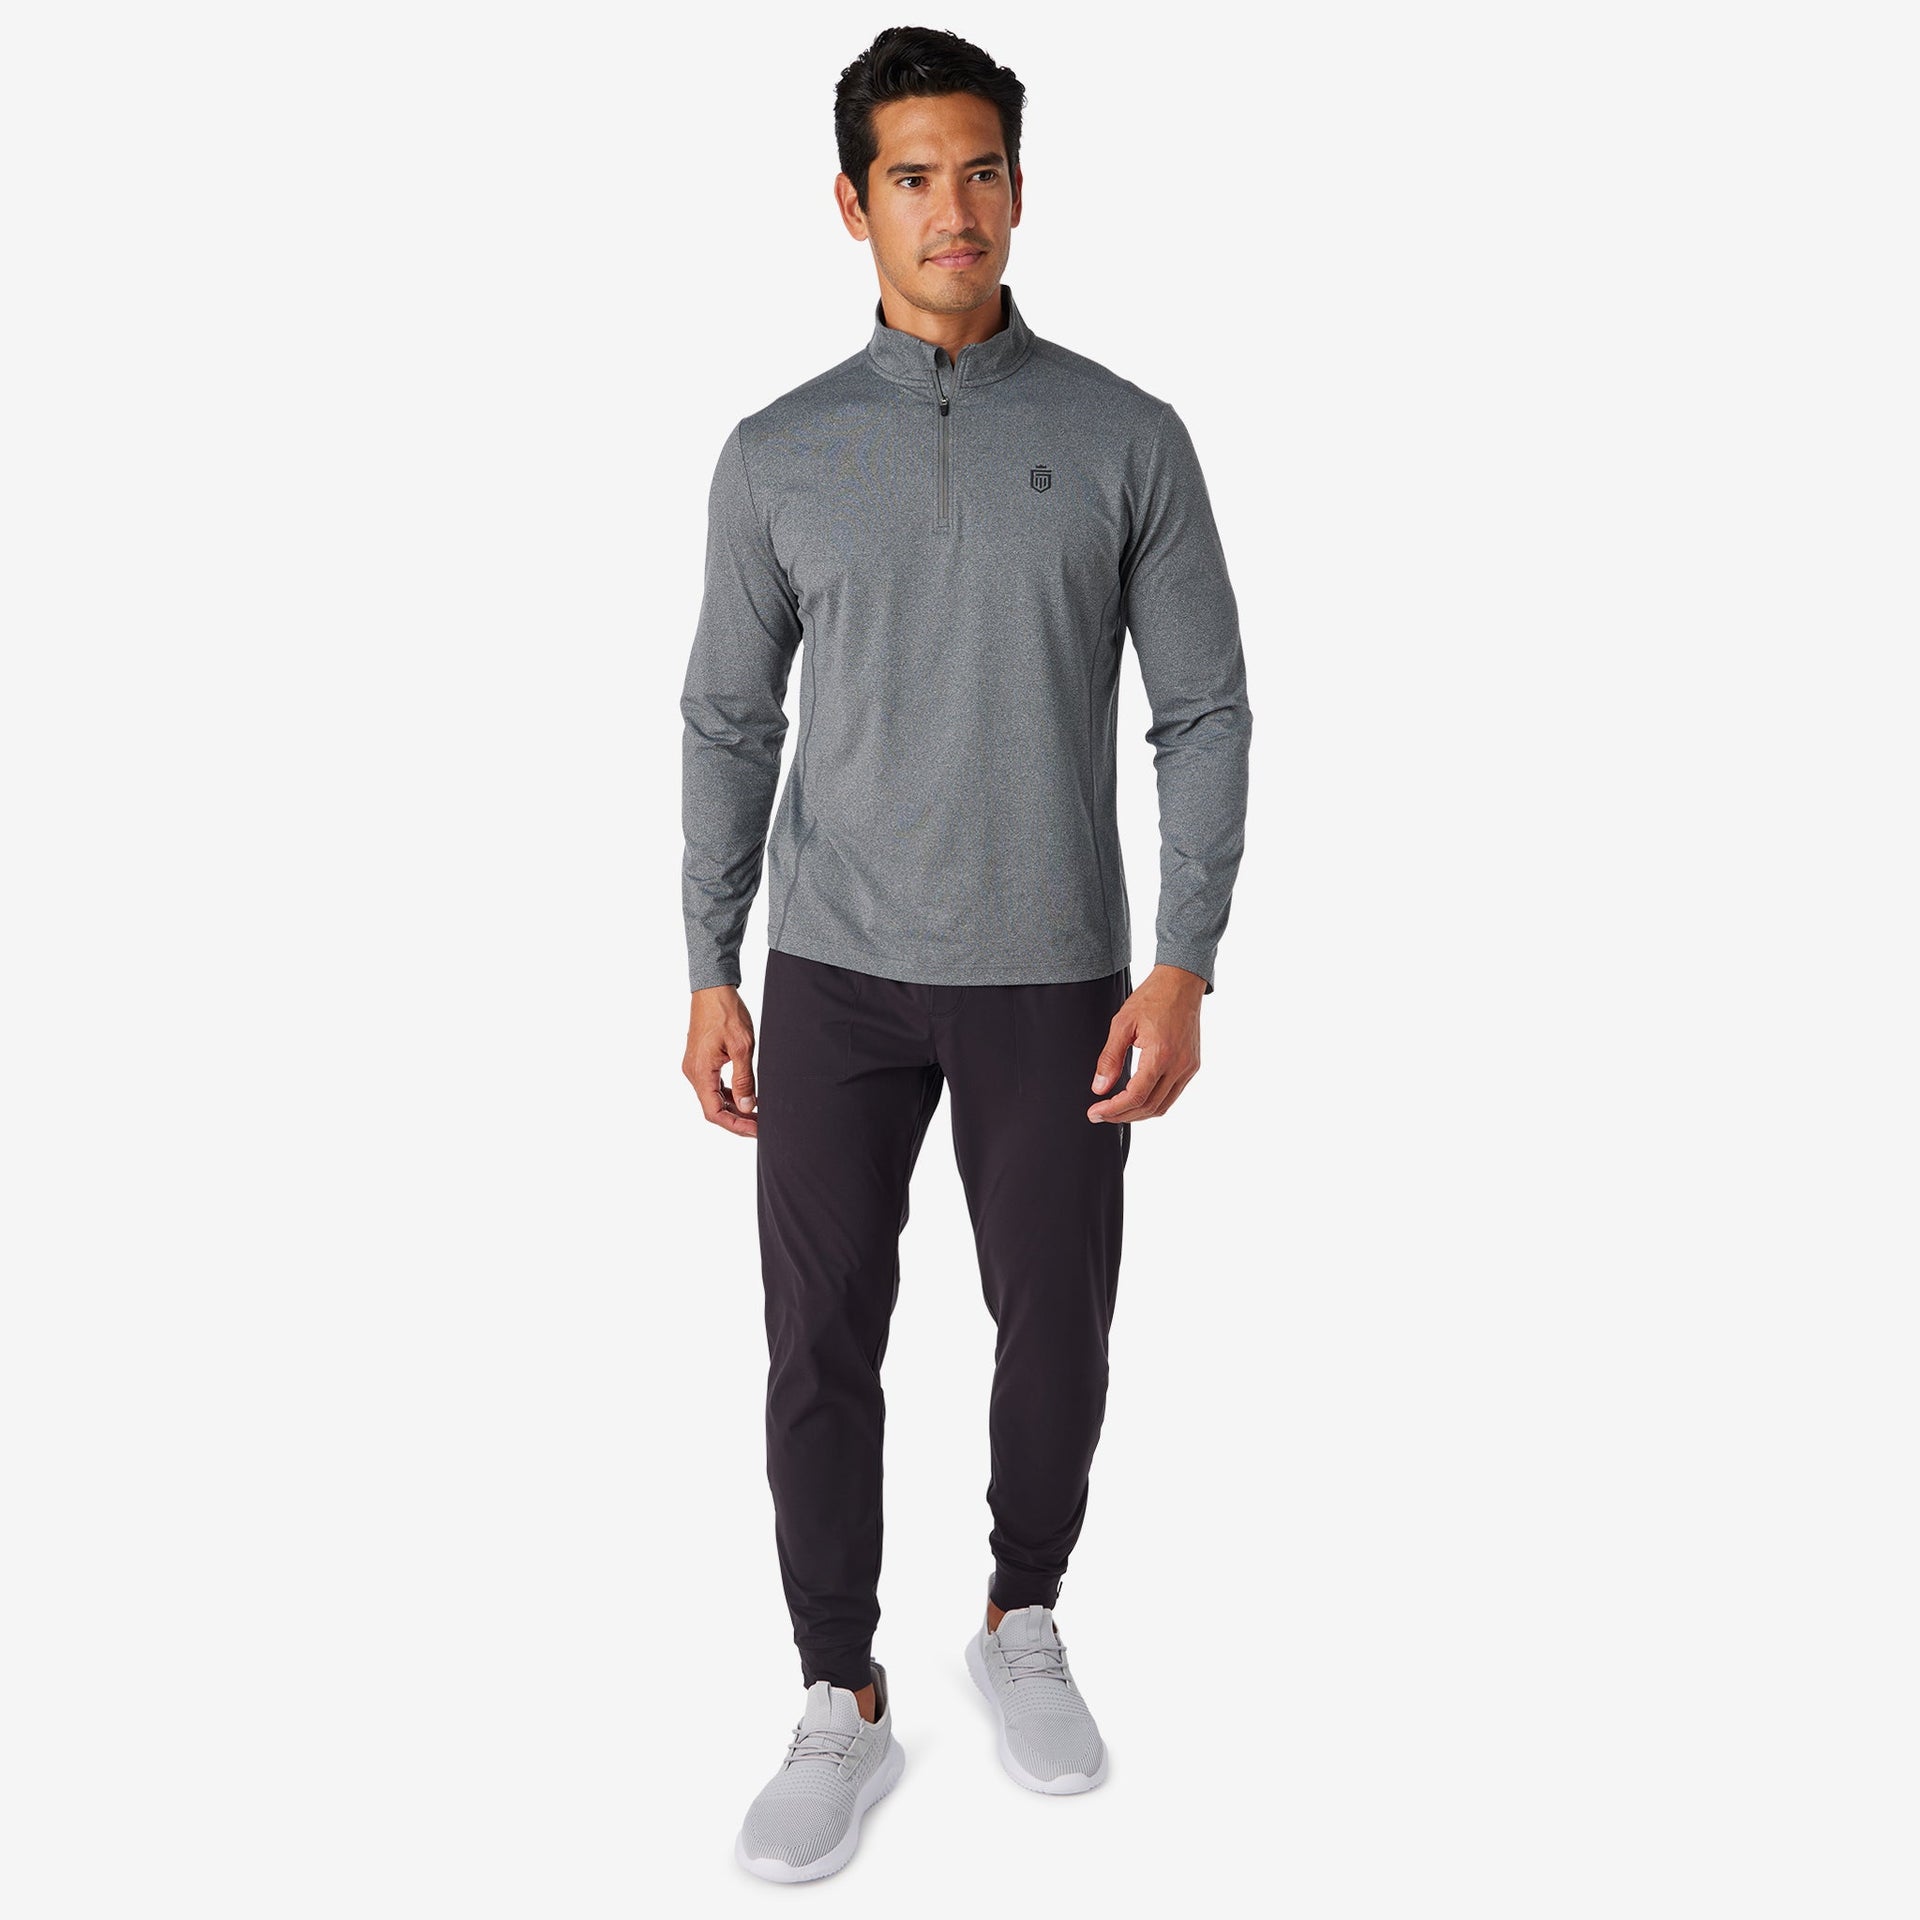 Mens Performance Jogger by Polartec® - 7th and Leroy